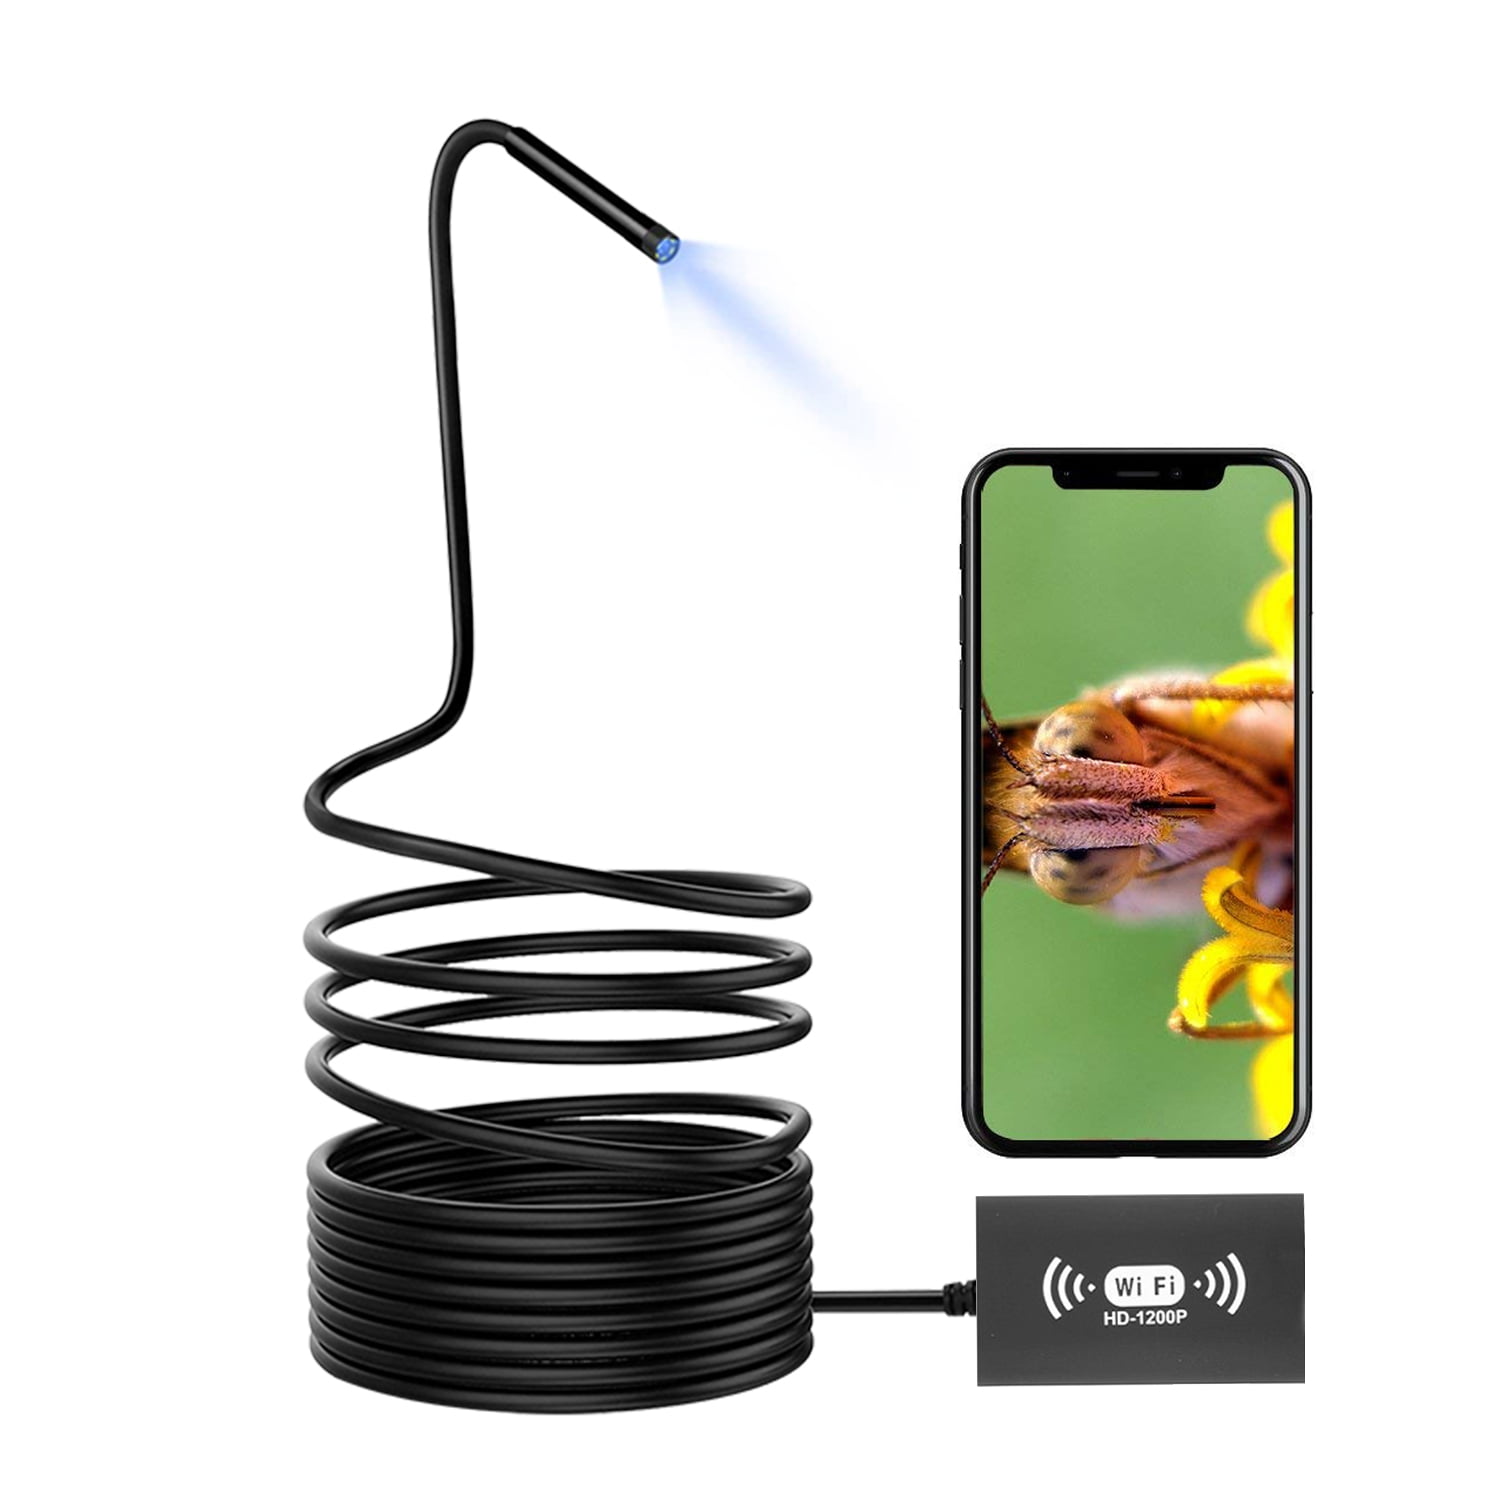 3.5M Hard Wire 2.0MP HD 8 LEDs Yellow 8mm Wireless Industrial Protable Endoscope Camera WiFi Inspection IP68 Waterproof Semi-Rigid Cable Borescope for iPhone/iPad/Android/PC 